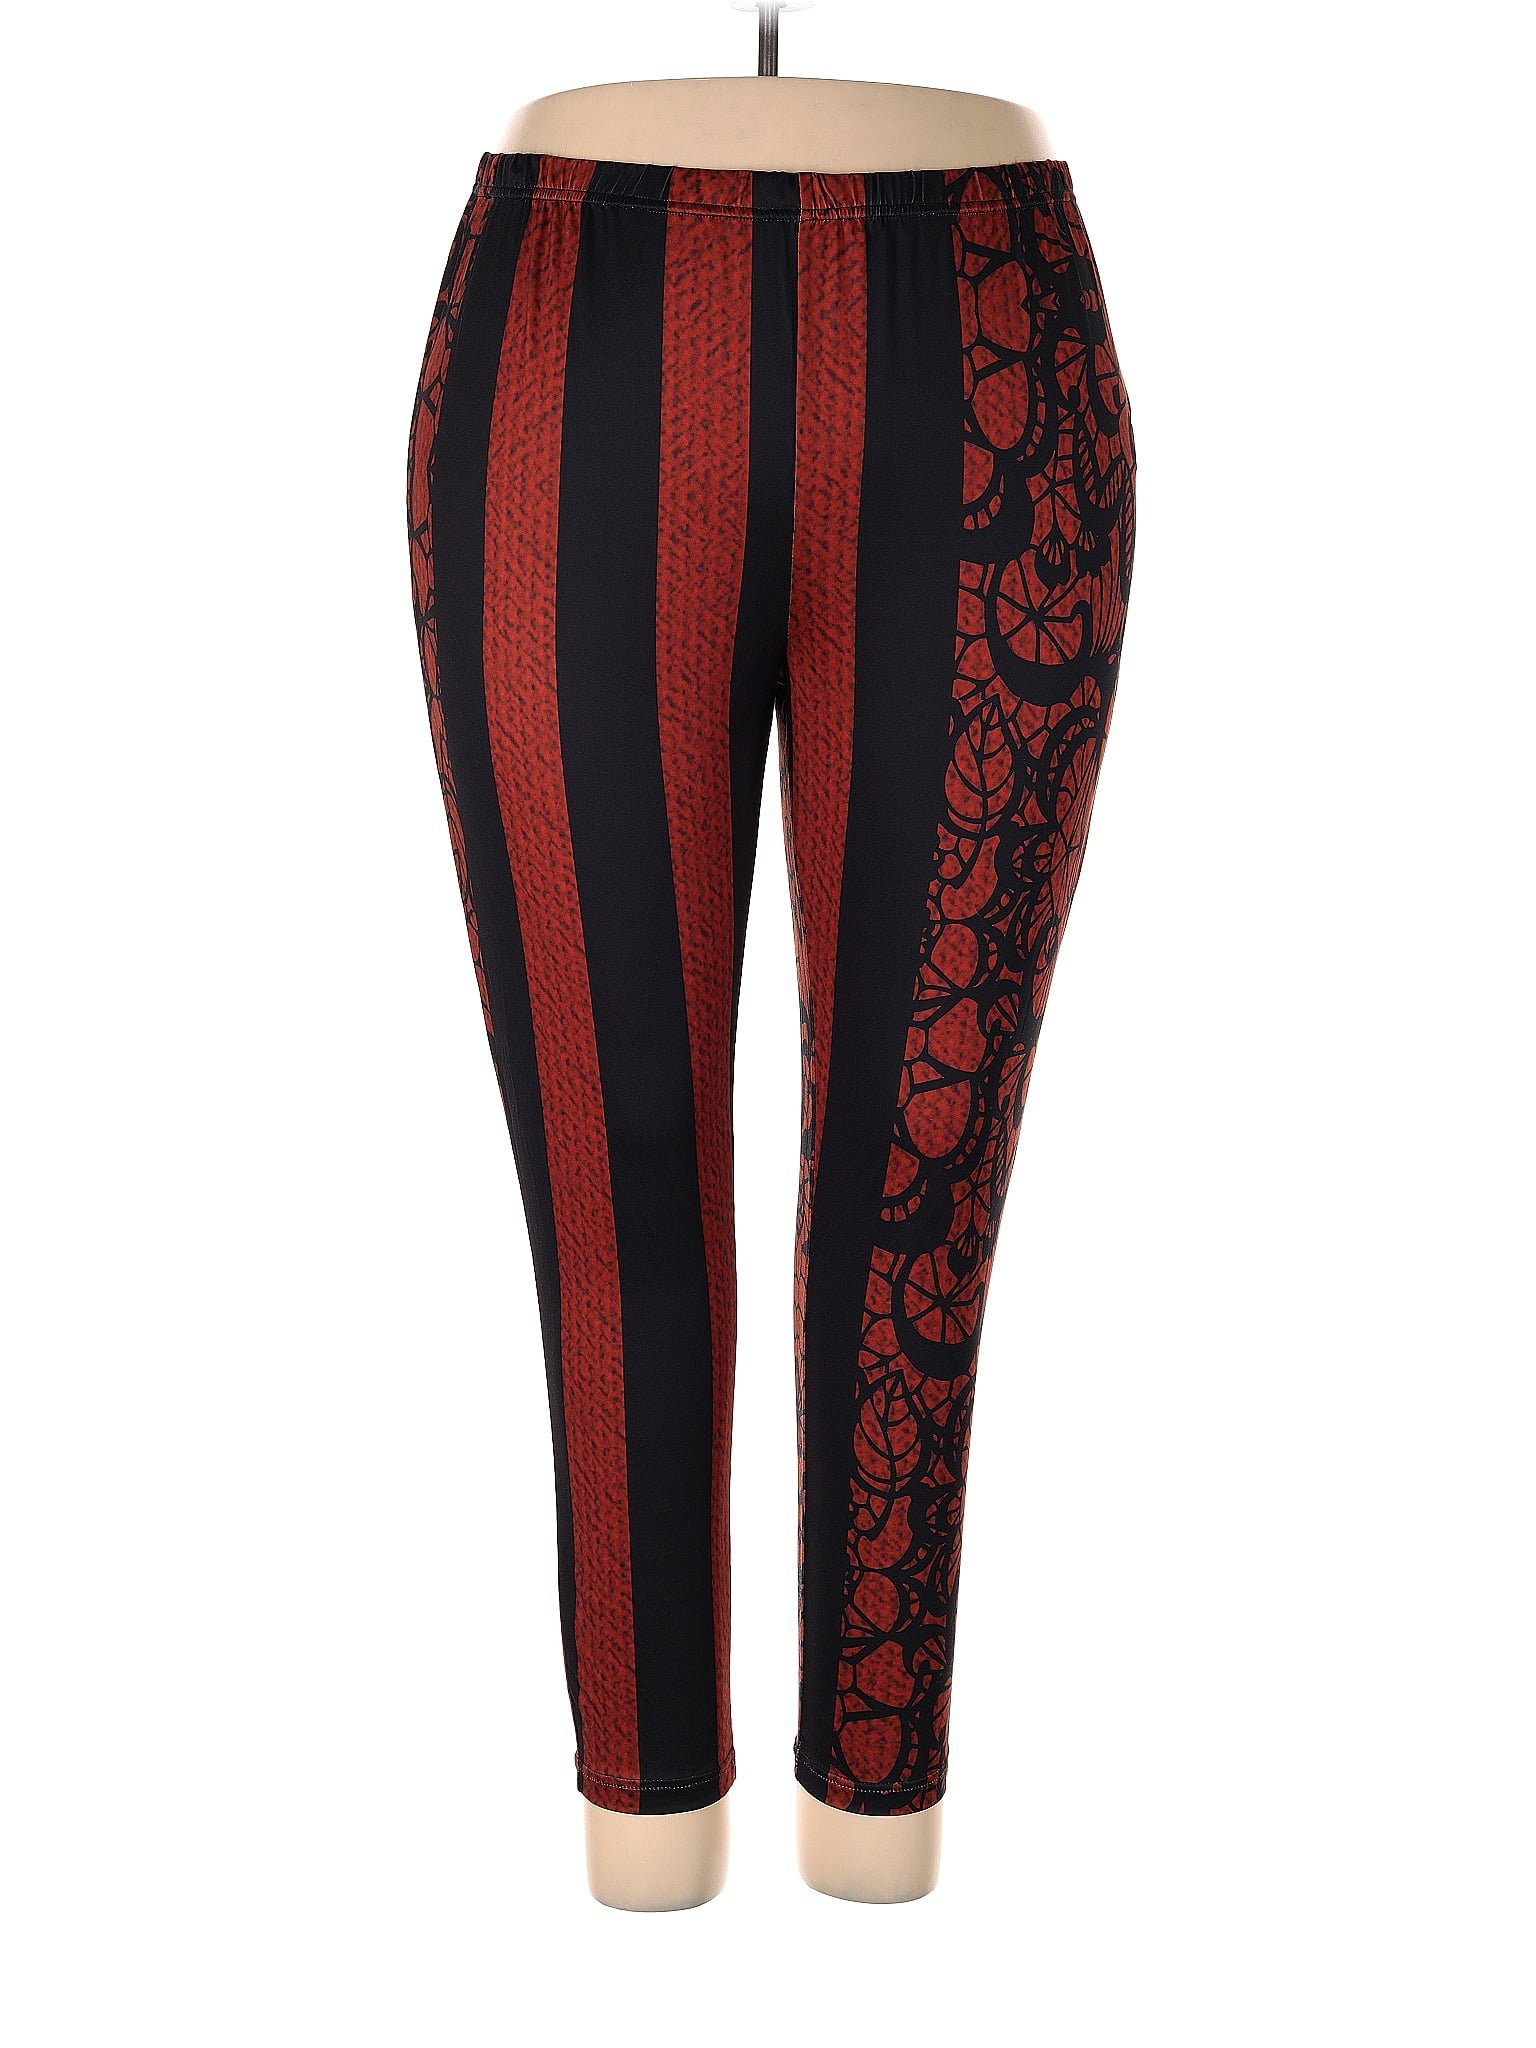 Lily by Firmiana Stripes Red Leggings Size 3X (Plus) - 65% off